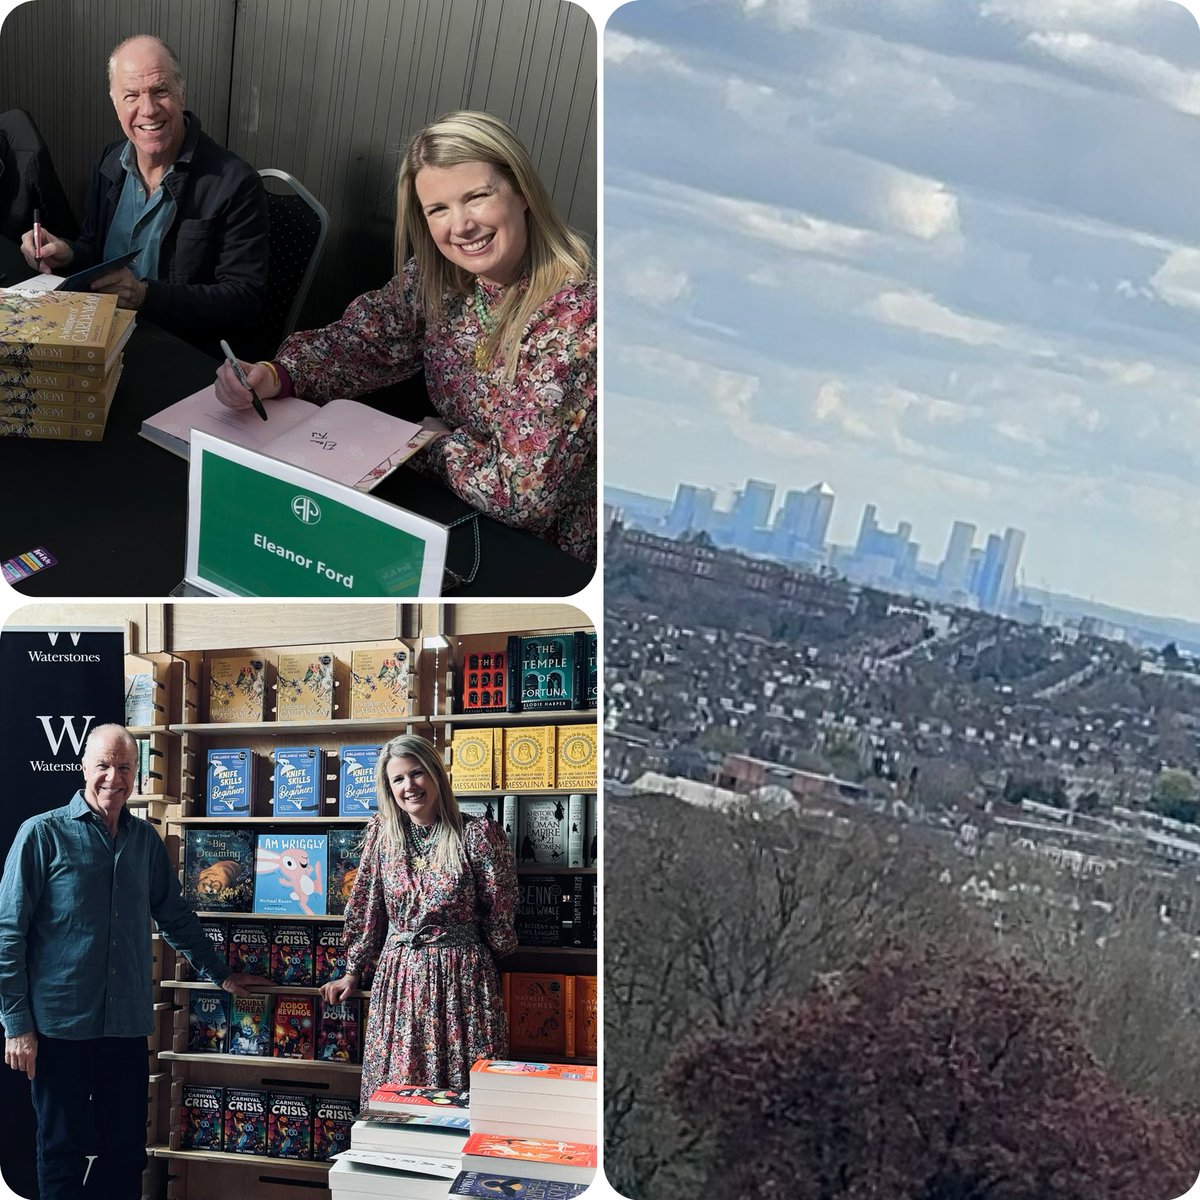 Great event yesterday talking spices and book signing with @EleanorFordFood at North London Book Fest, Alexandra Palace. (What a view.) thanks @ckbk and @gowerst_books